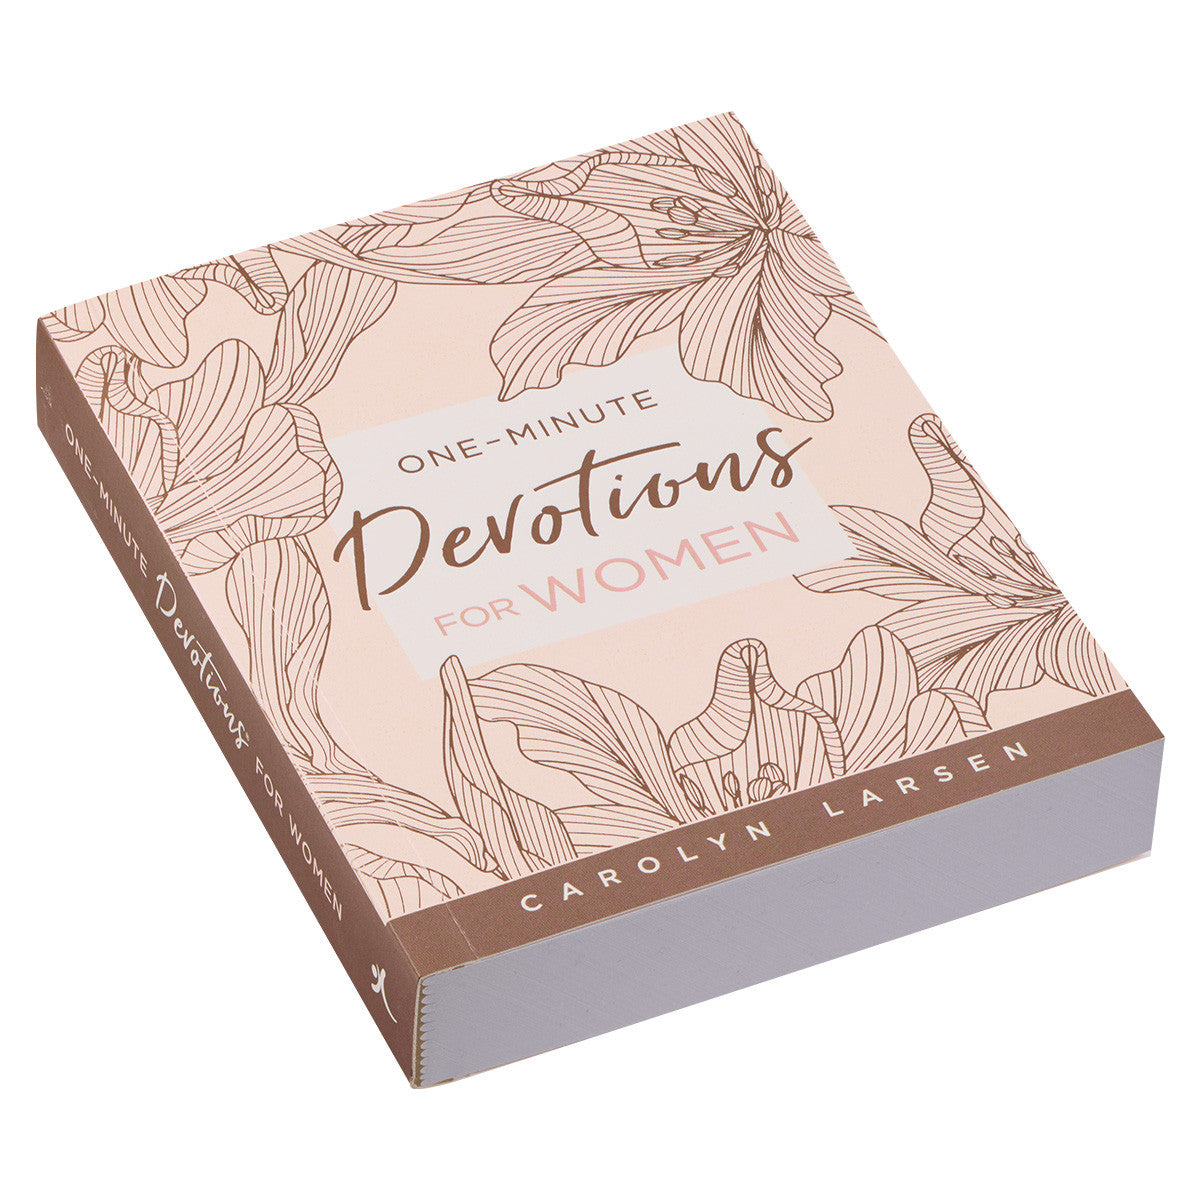 One-Minute Devotions for Women - The Christian Gift Company